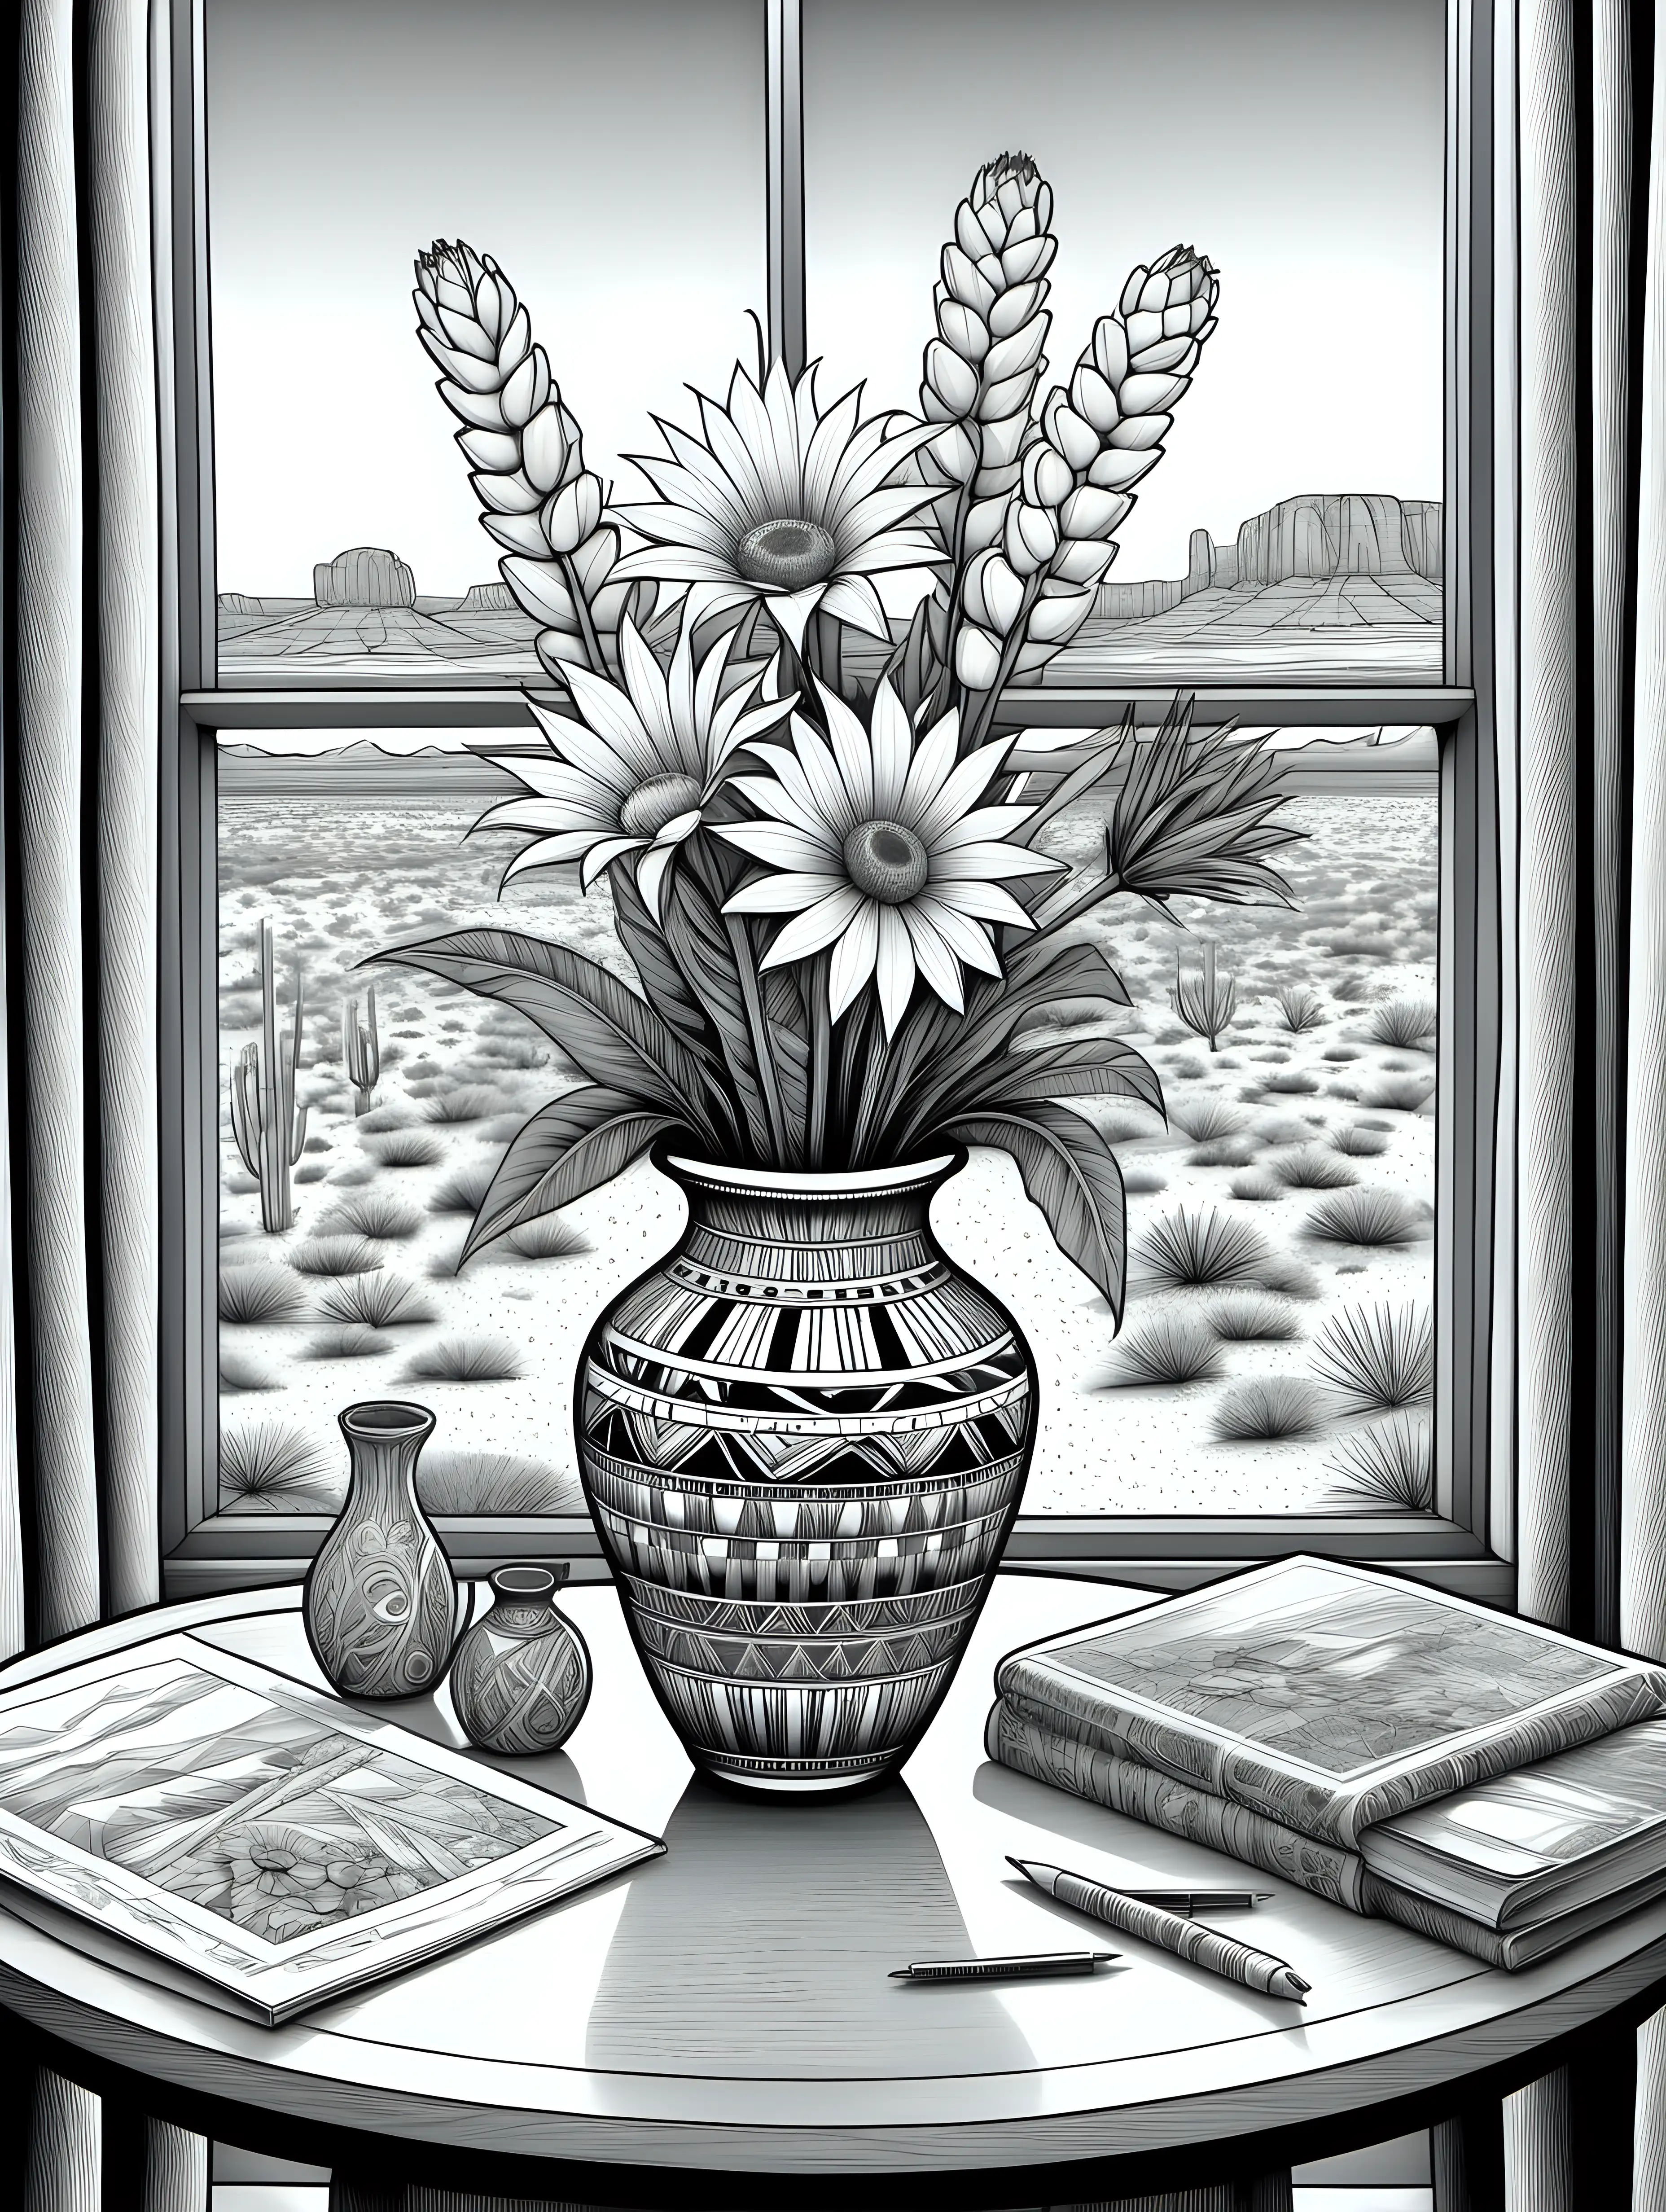 black and white, adult coloring book style drawing, highly detailed, white background, focus on large flower arrangement with native arizona flowers in a typical native american vase sitting on a table in front of a window, scene includes a detailed arizona desert scene in the distance, items on table